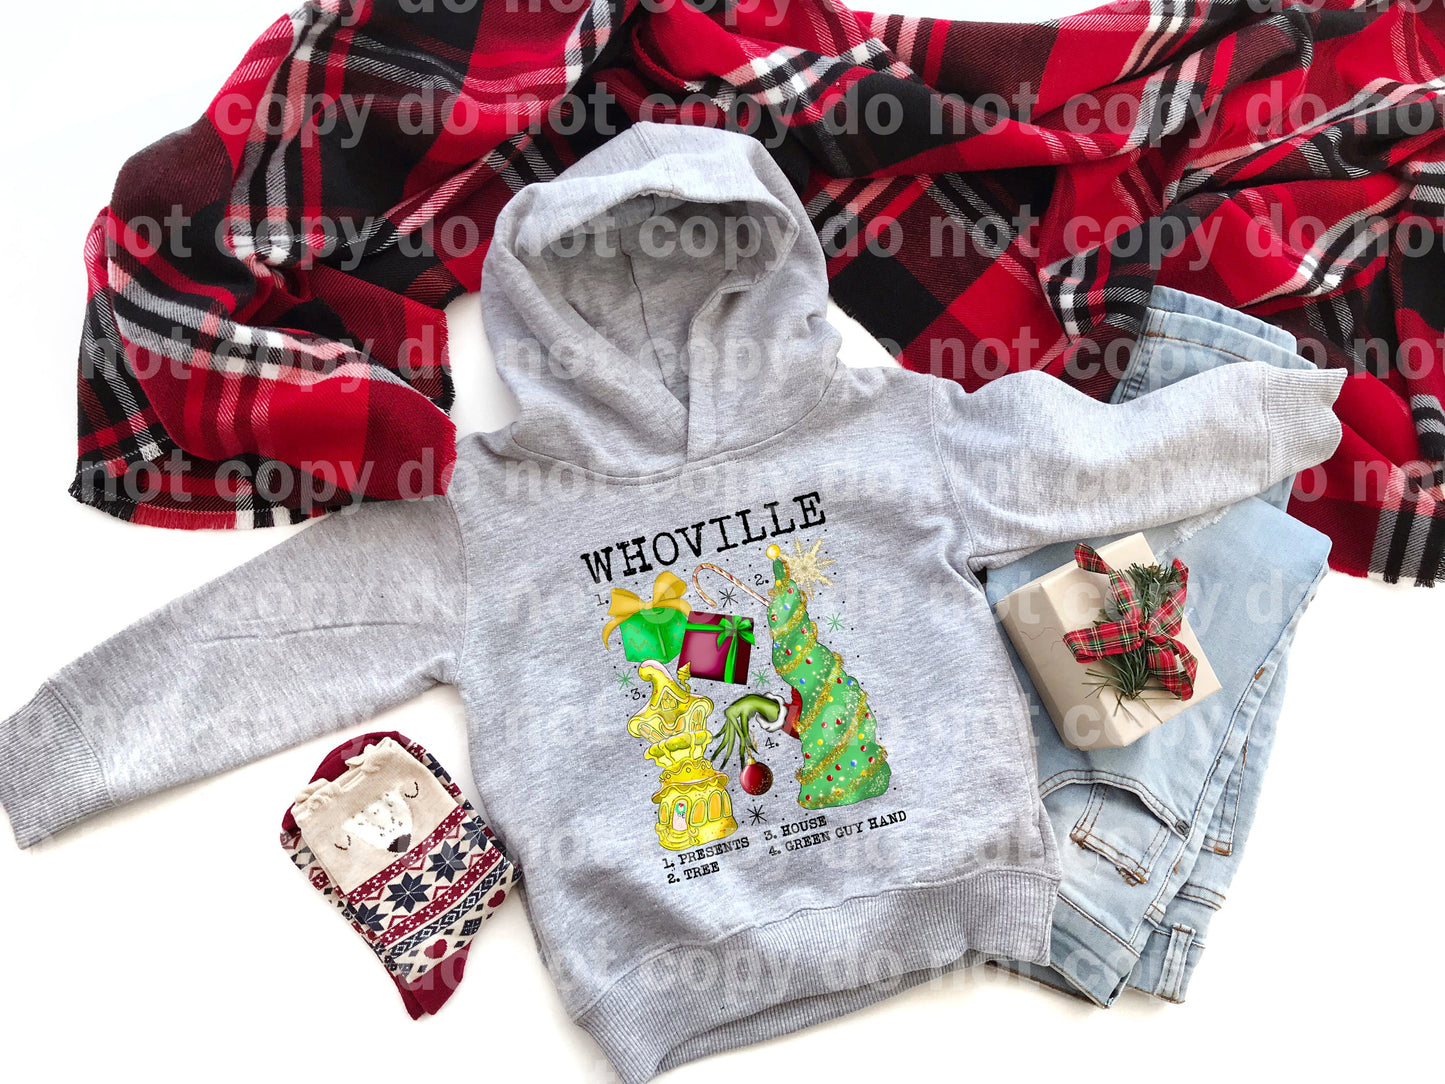 Whoville Dream Print or Sublimation Print